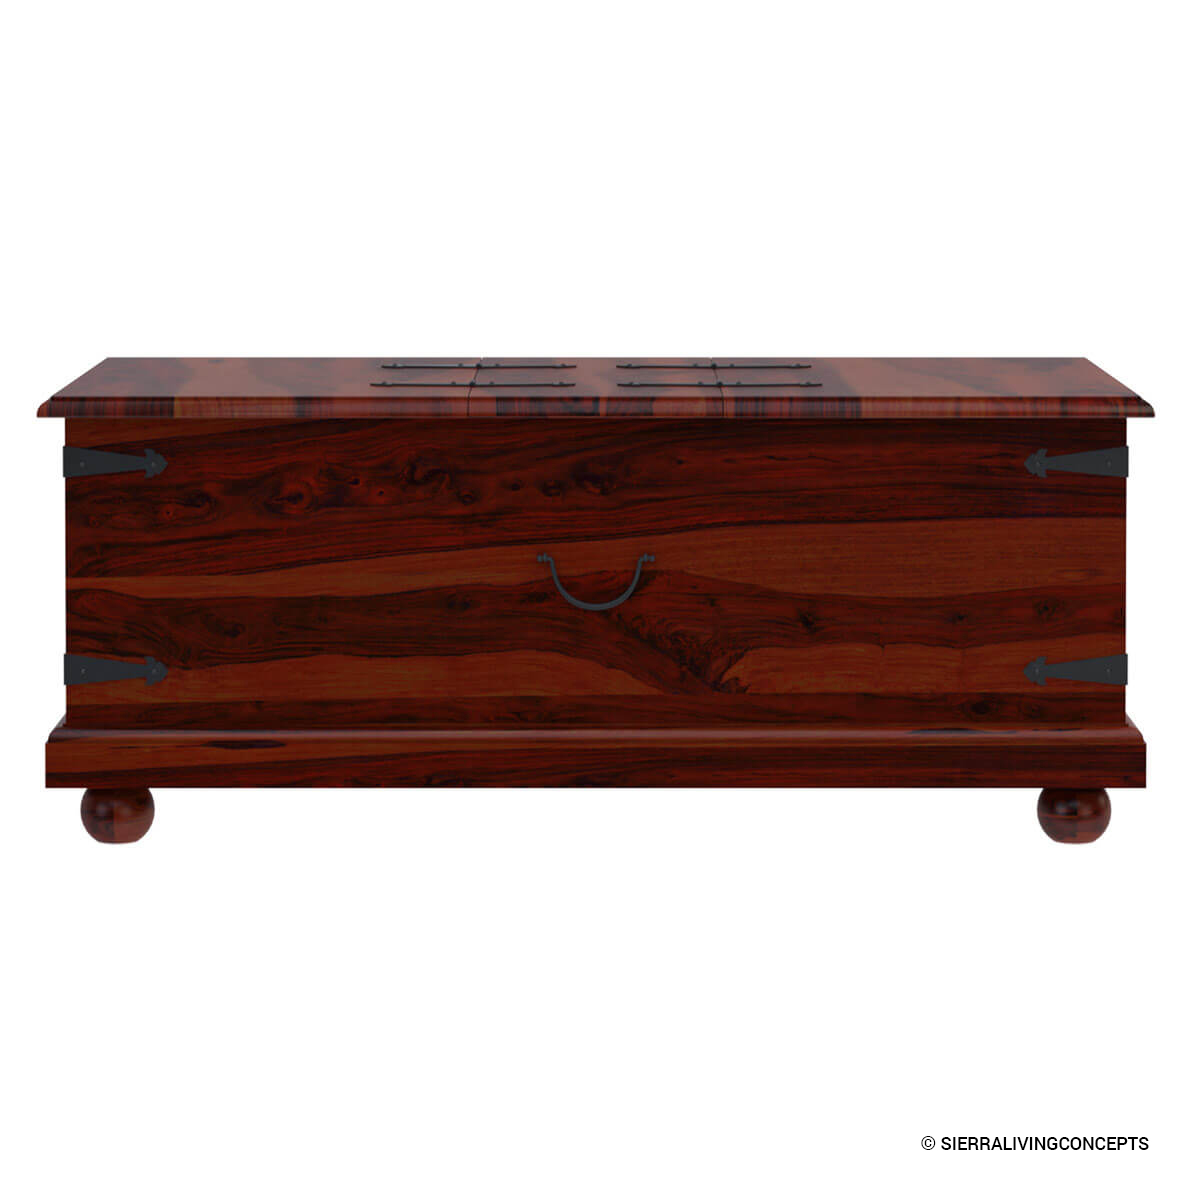 Beaufort Steamer Storage Trunk Rustic Coffee Table Chest